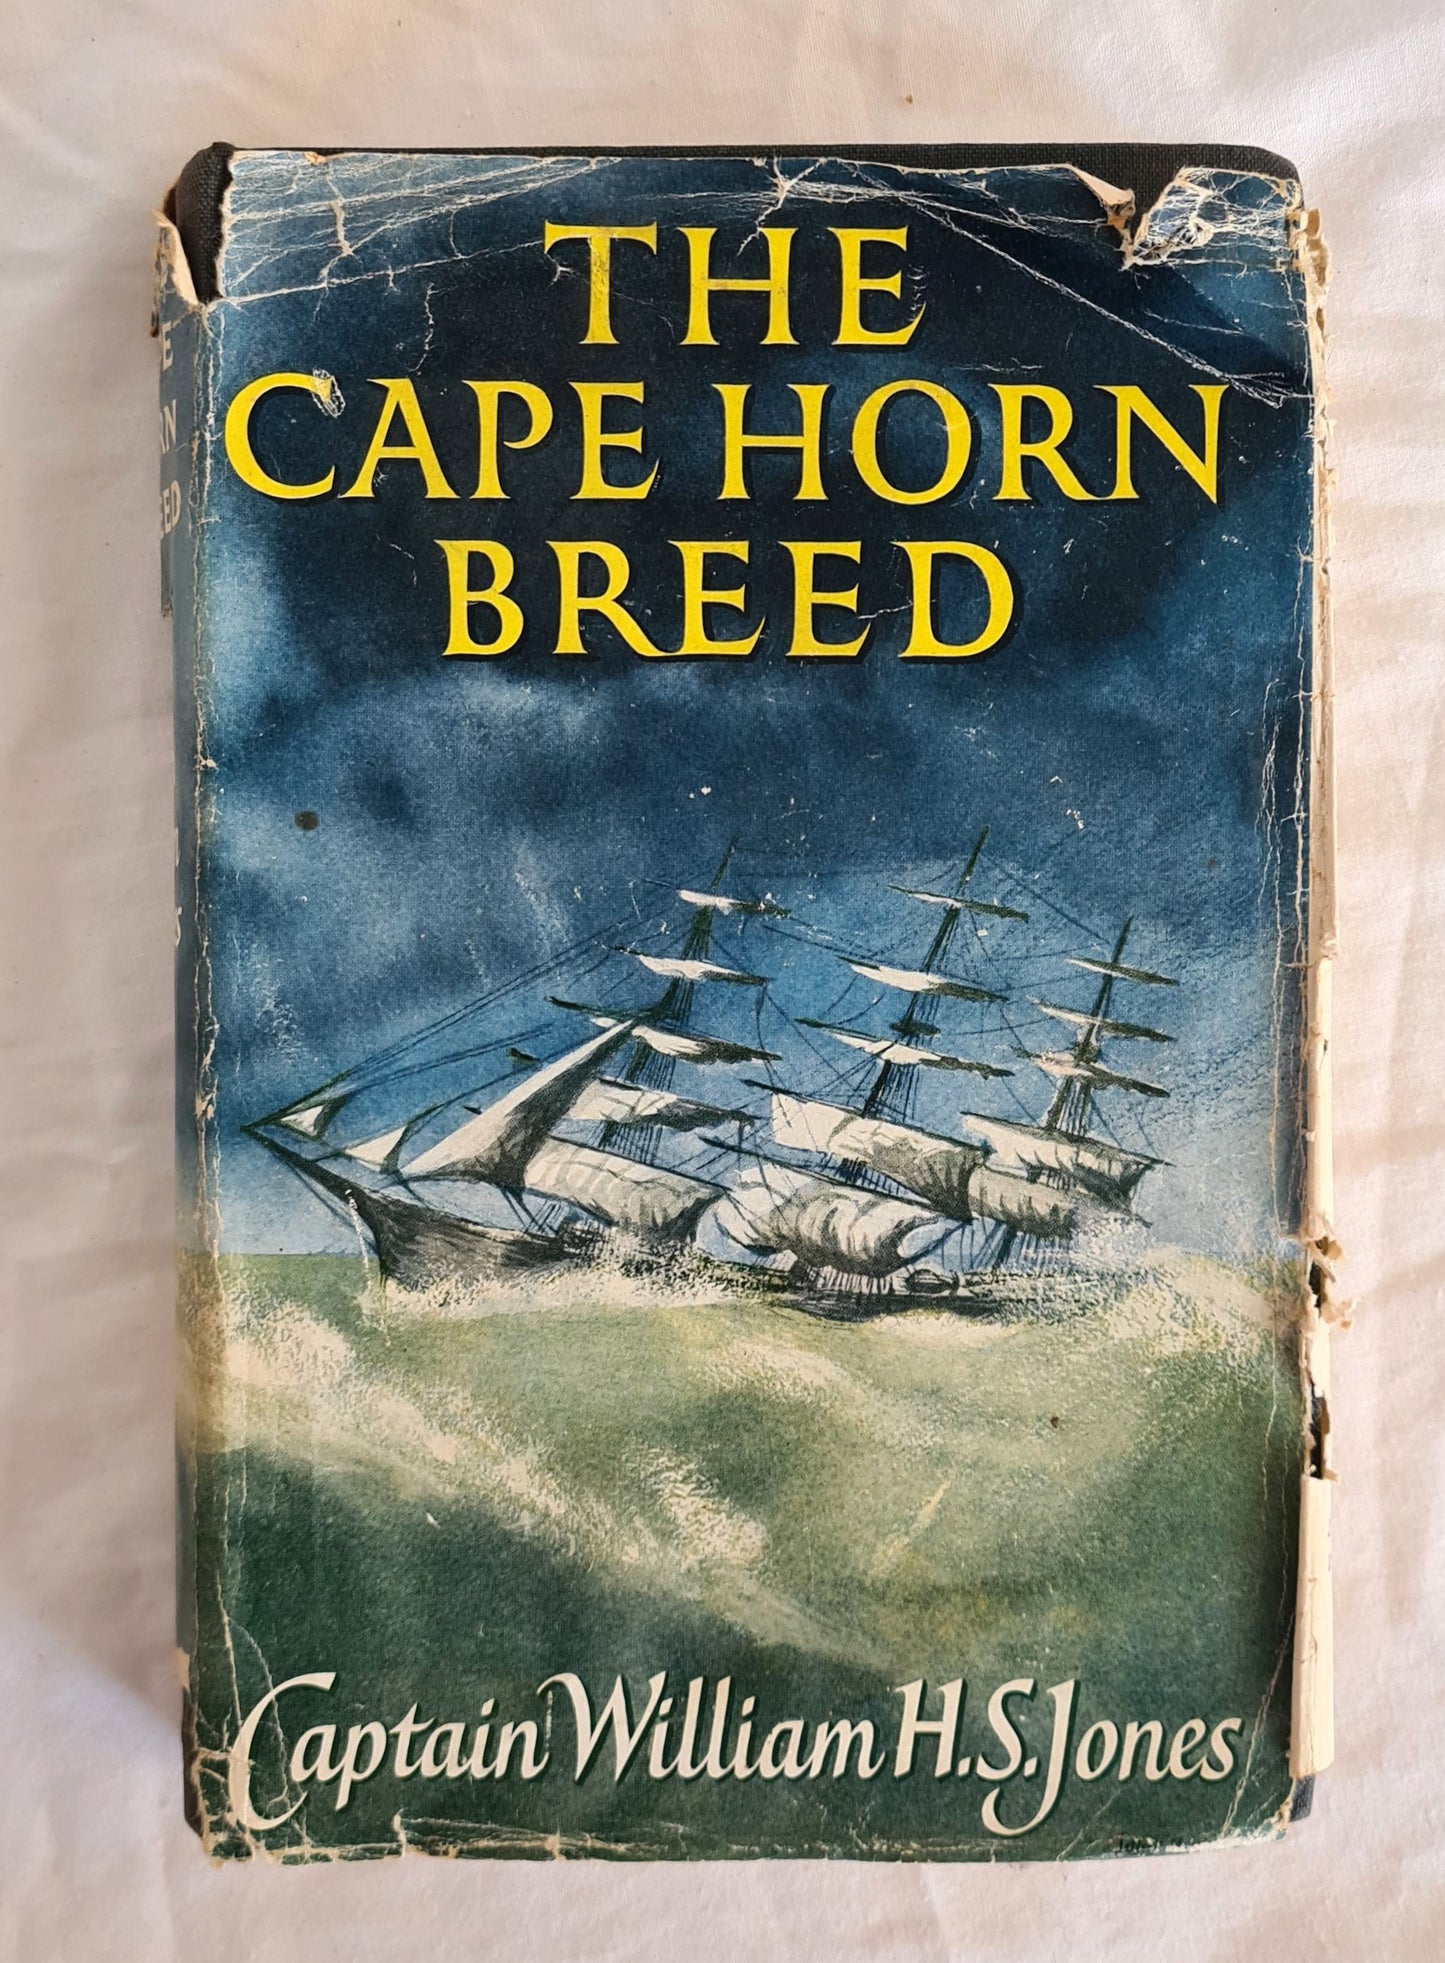 The Cape Horn Breed  My Experiences as an Apprentice in Sail in the Full-rigged Ship “British Isles”  by Captain William H. S. Jones  as told to P. R. Stephensen